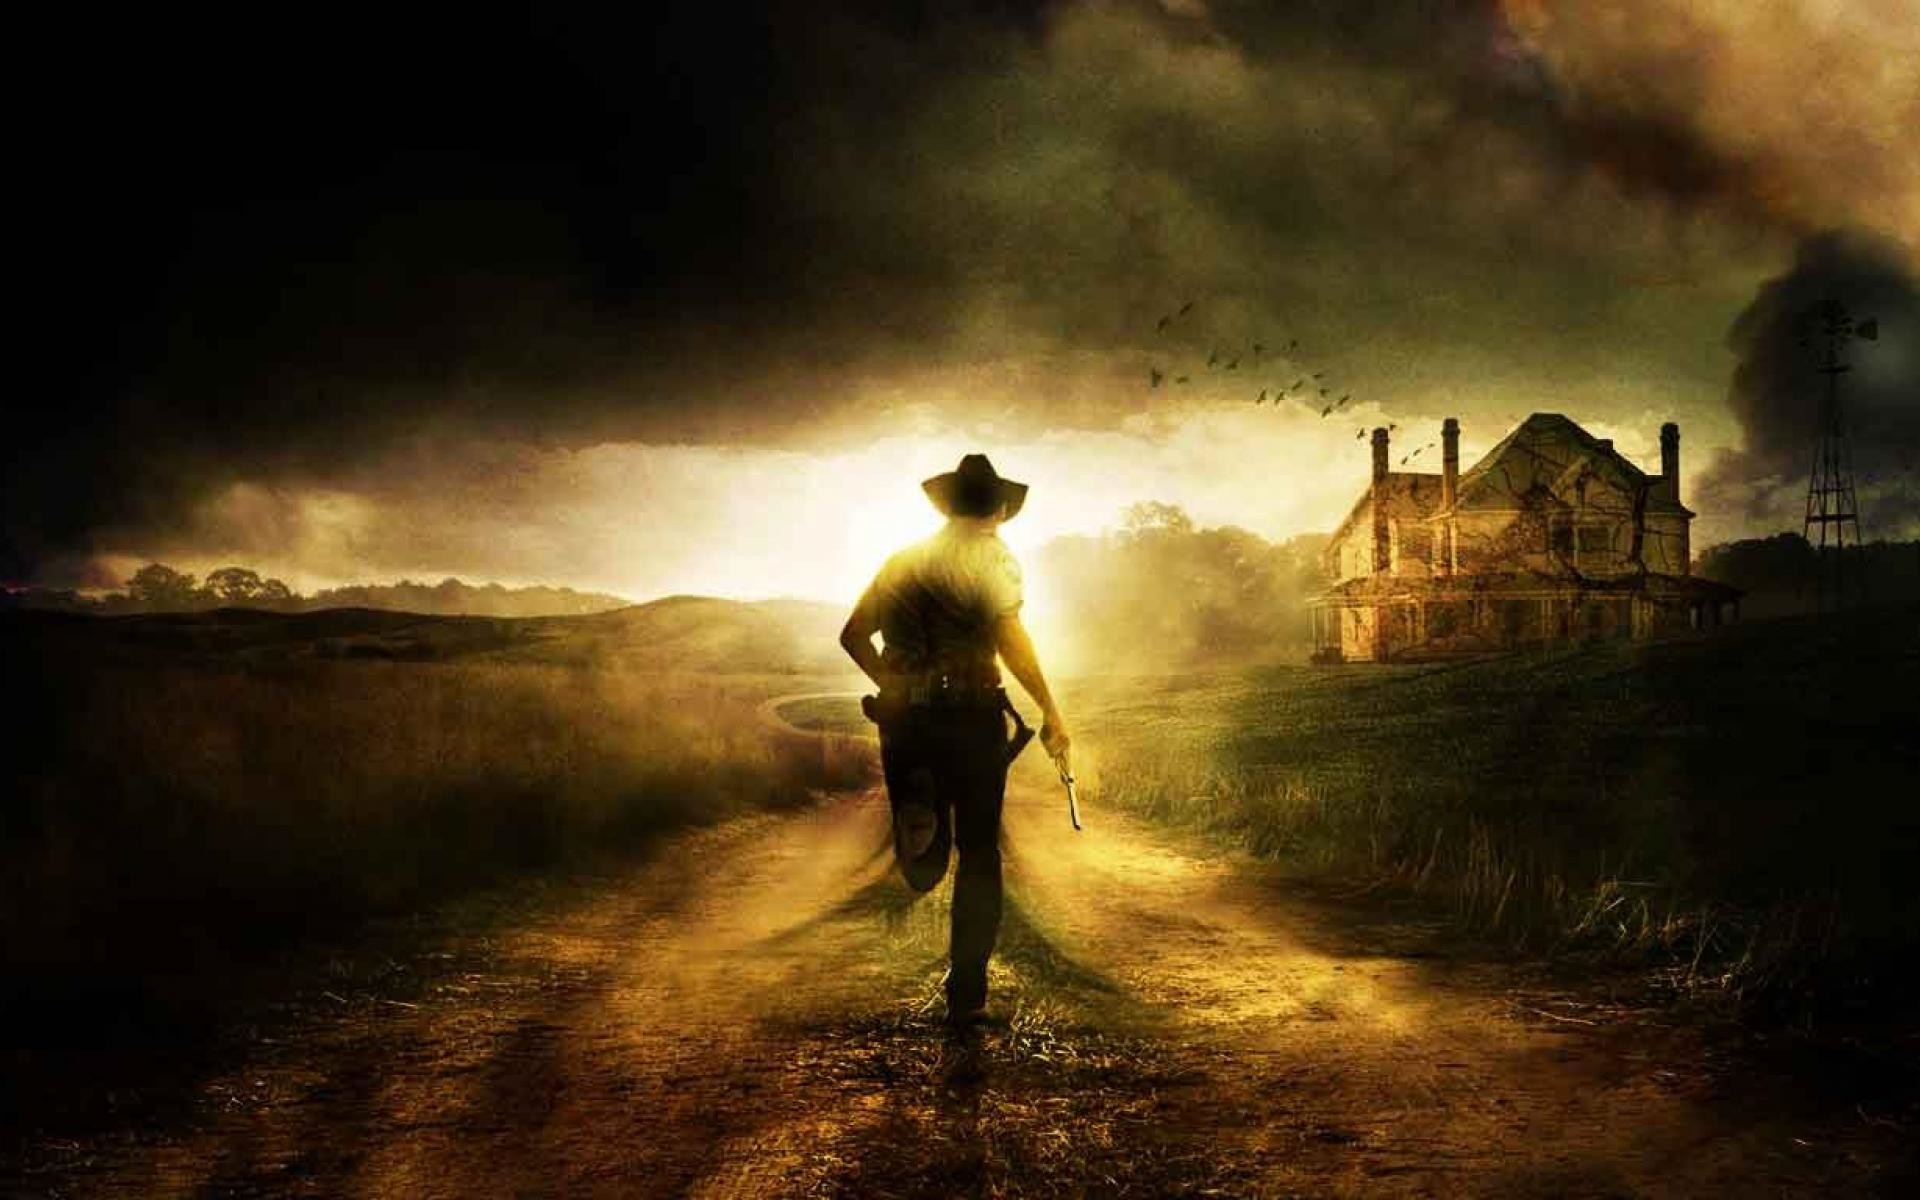 Free Download The Walking Dead Wallpaper 1366x768 55 Images 1920x1200 For Your Desktop Mobile 3561